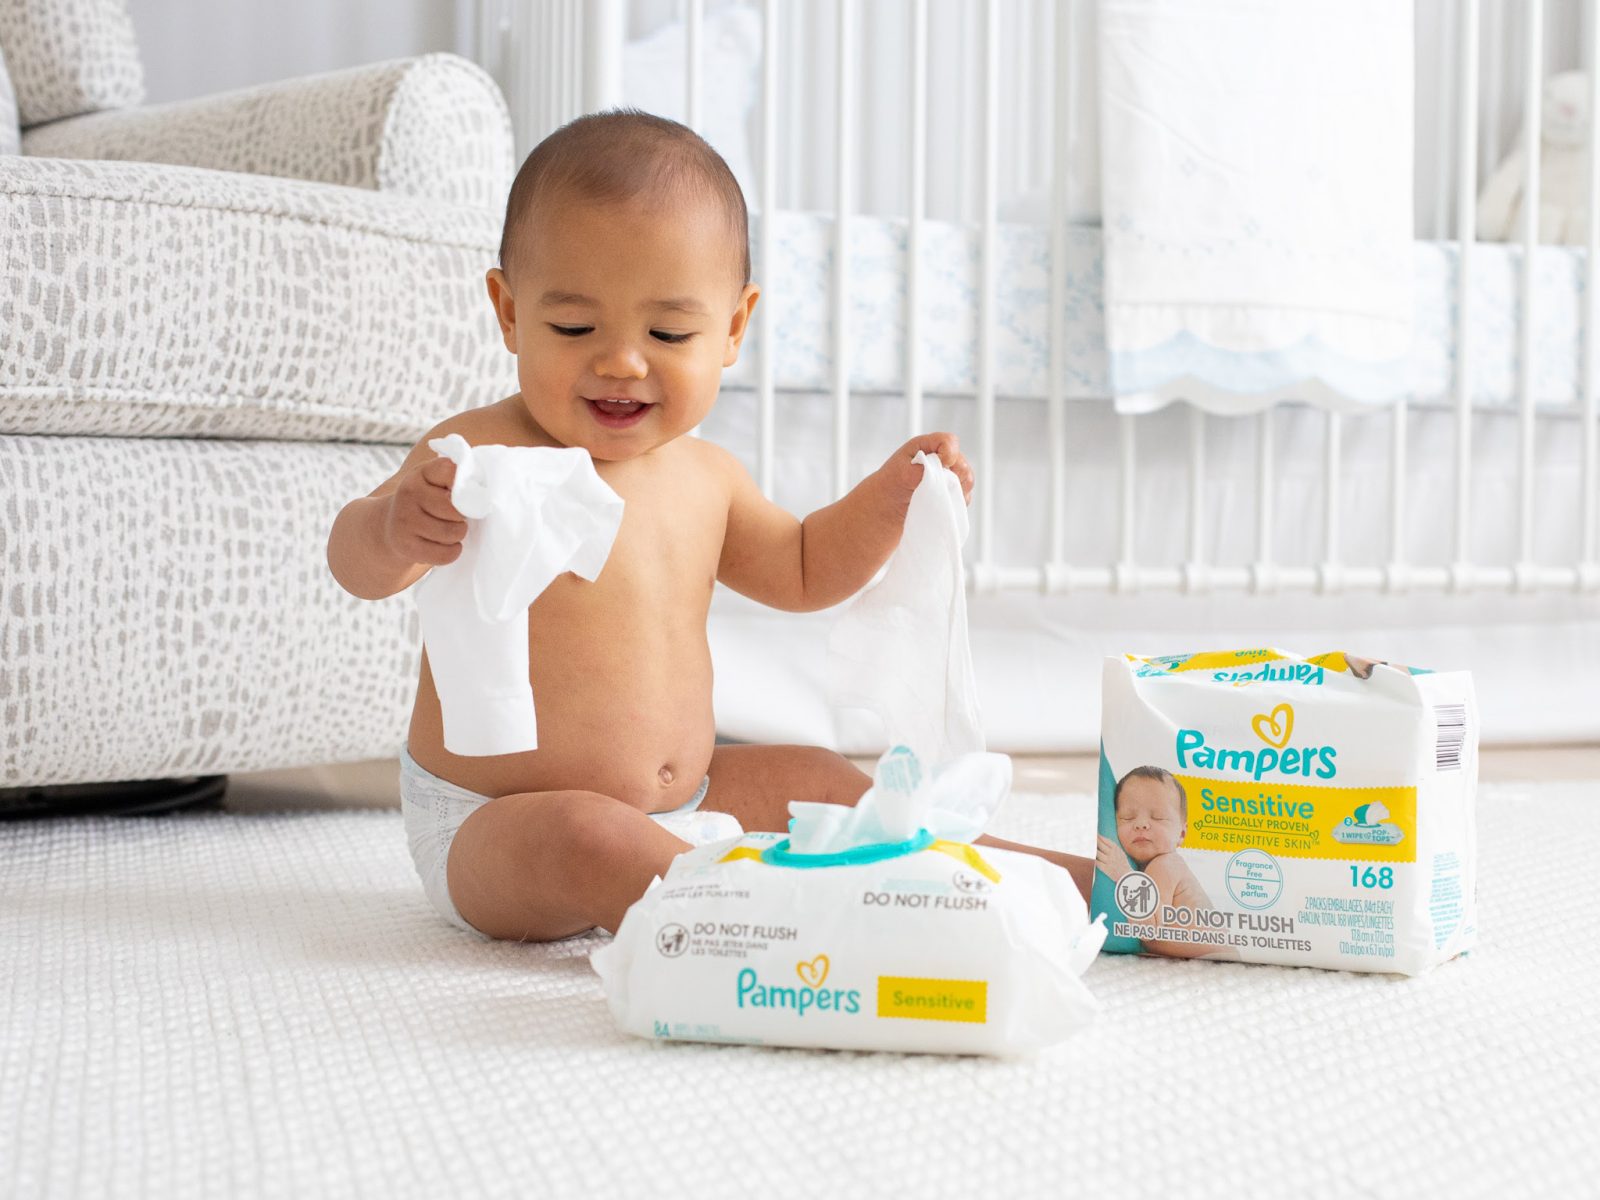 Get Pampers Wipes For As Low As $1.49 At Kroger